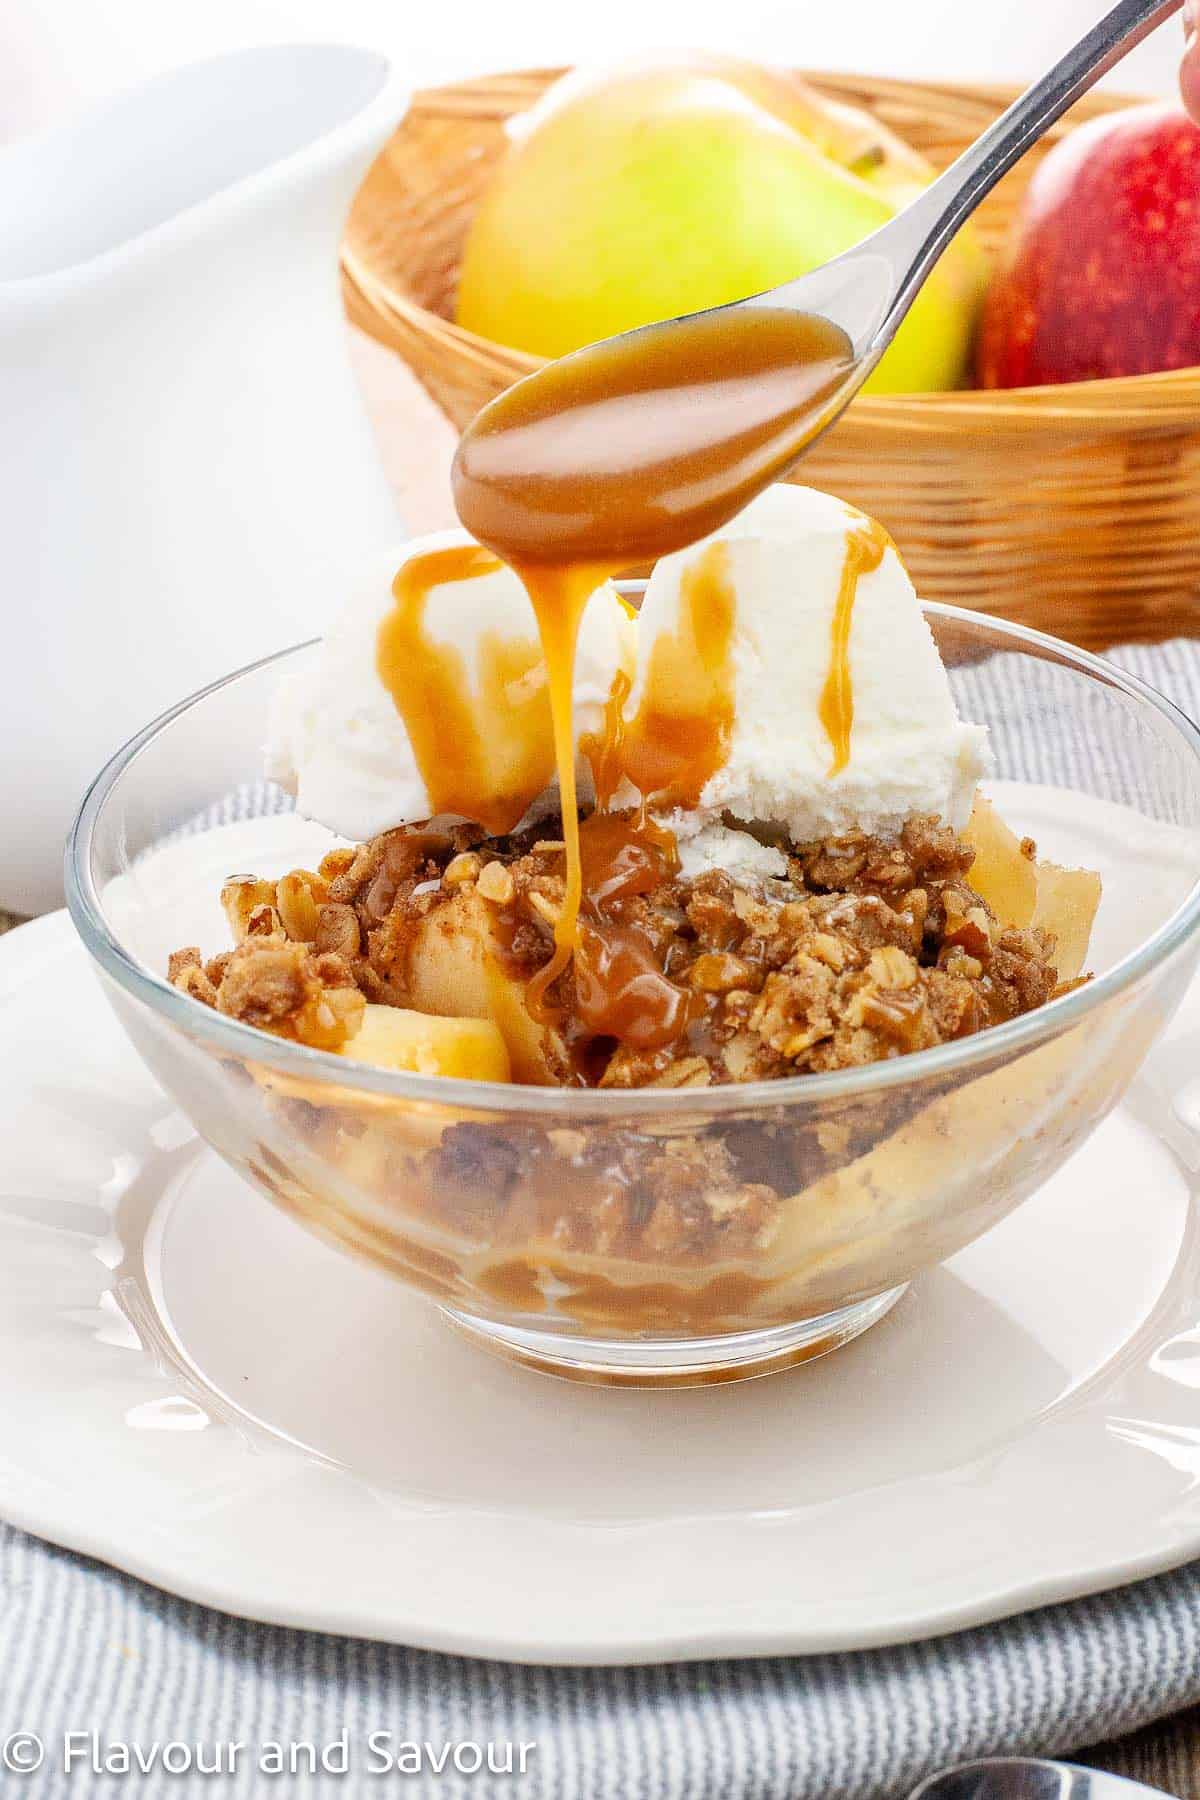 Spooning caramel sauce on apple crisp with a pecan oat crumble topping.